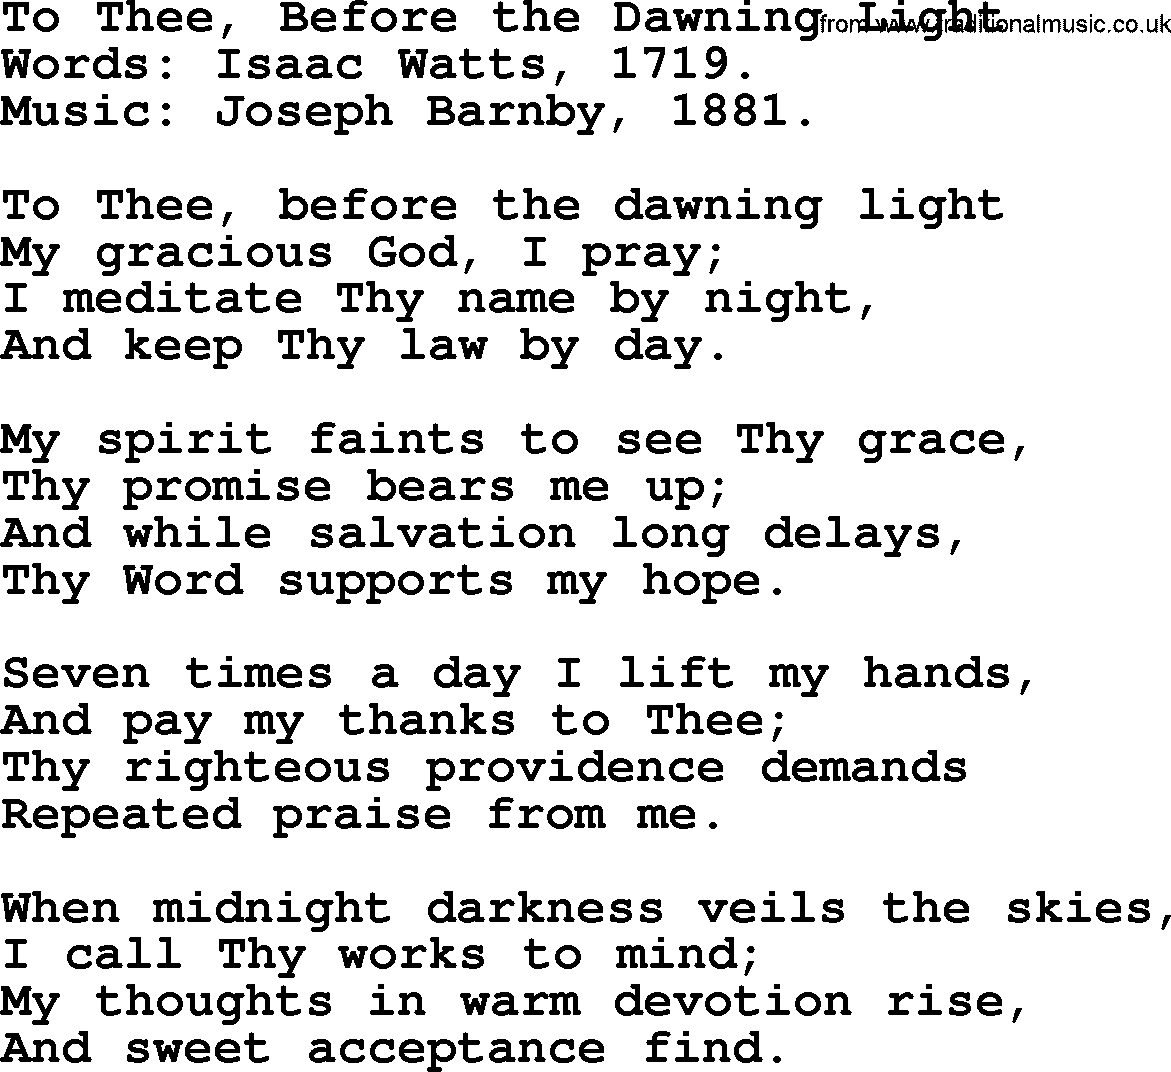 Isaac Watts Christian hymn: To Thee, Before the Dawning Light- lyricss